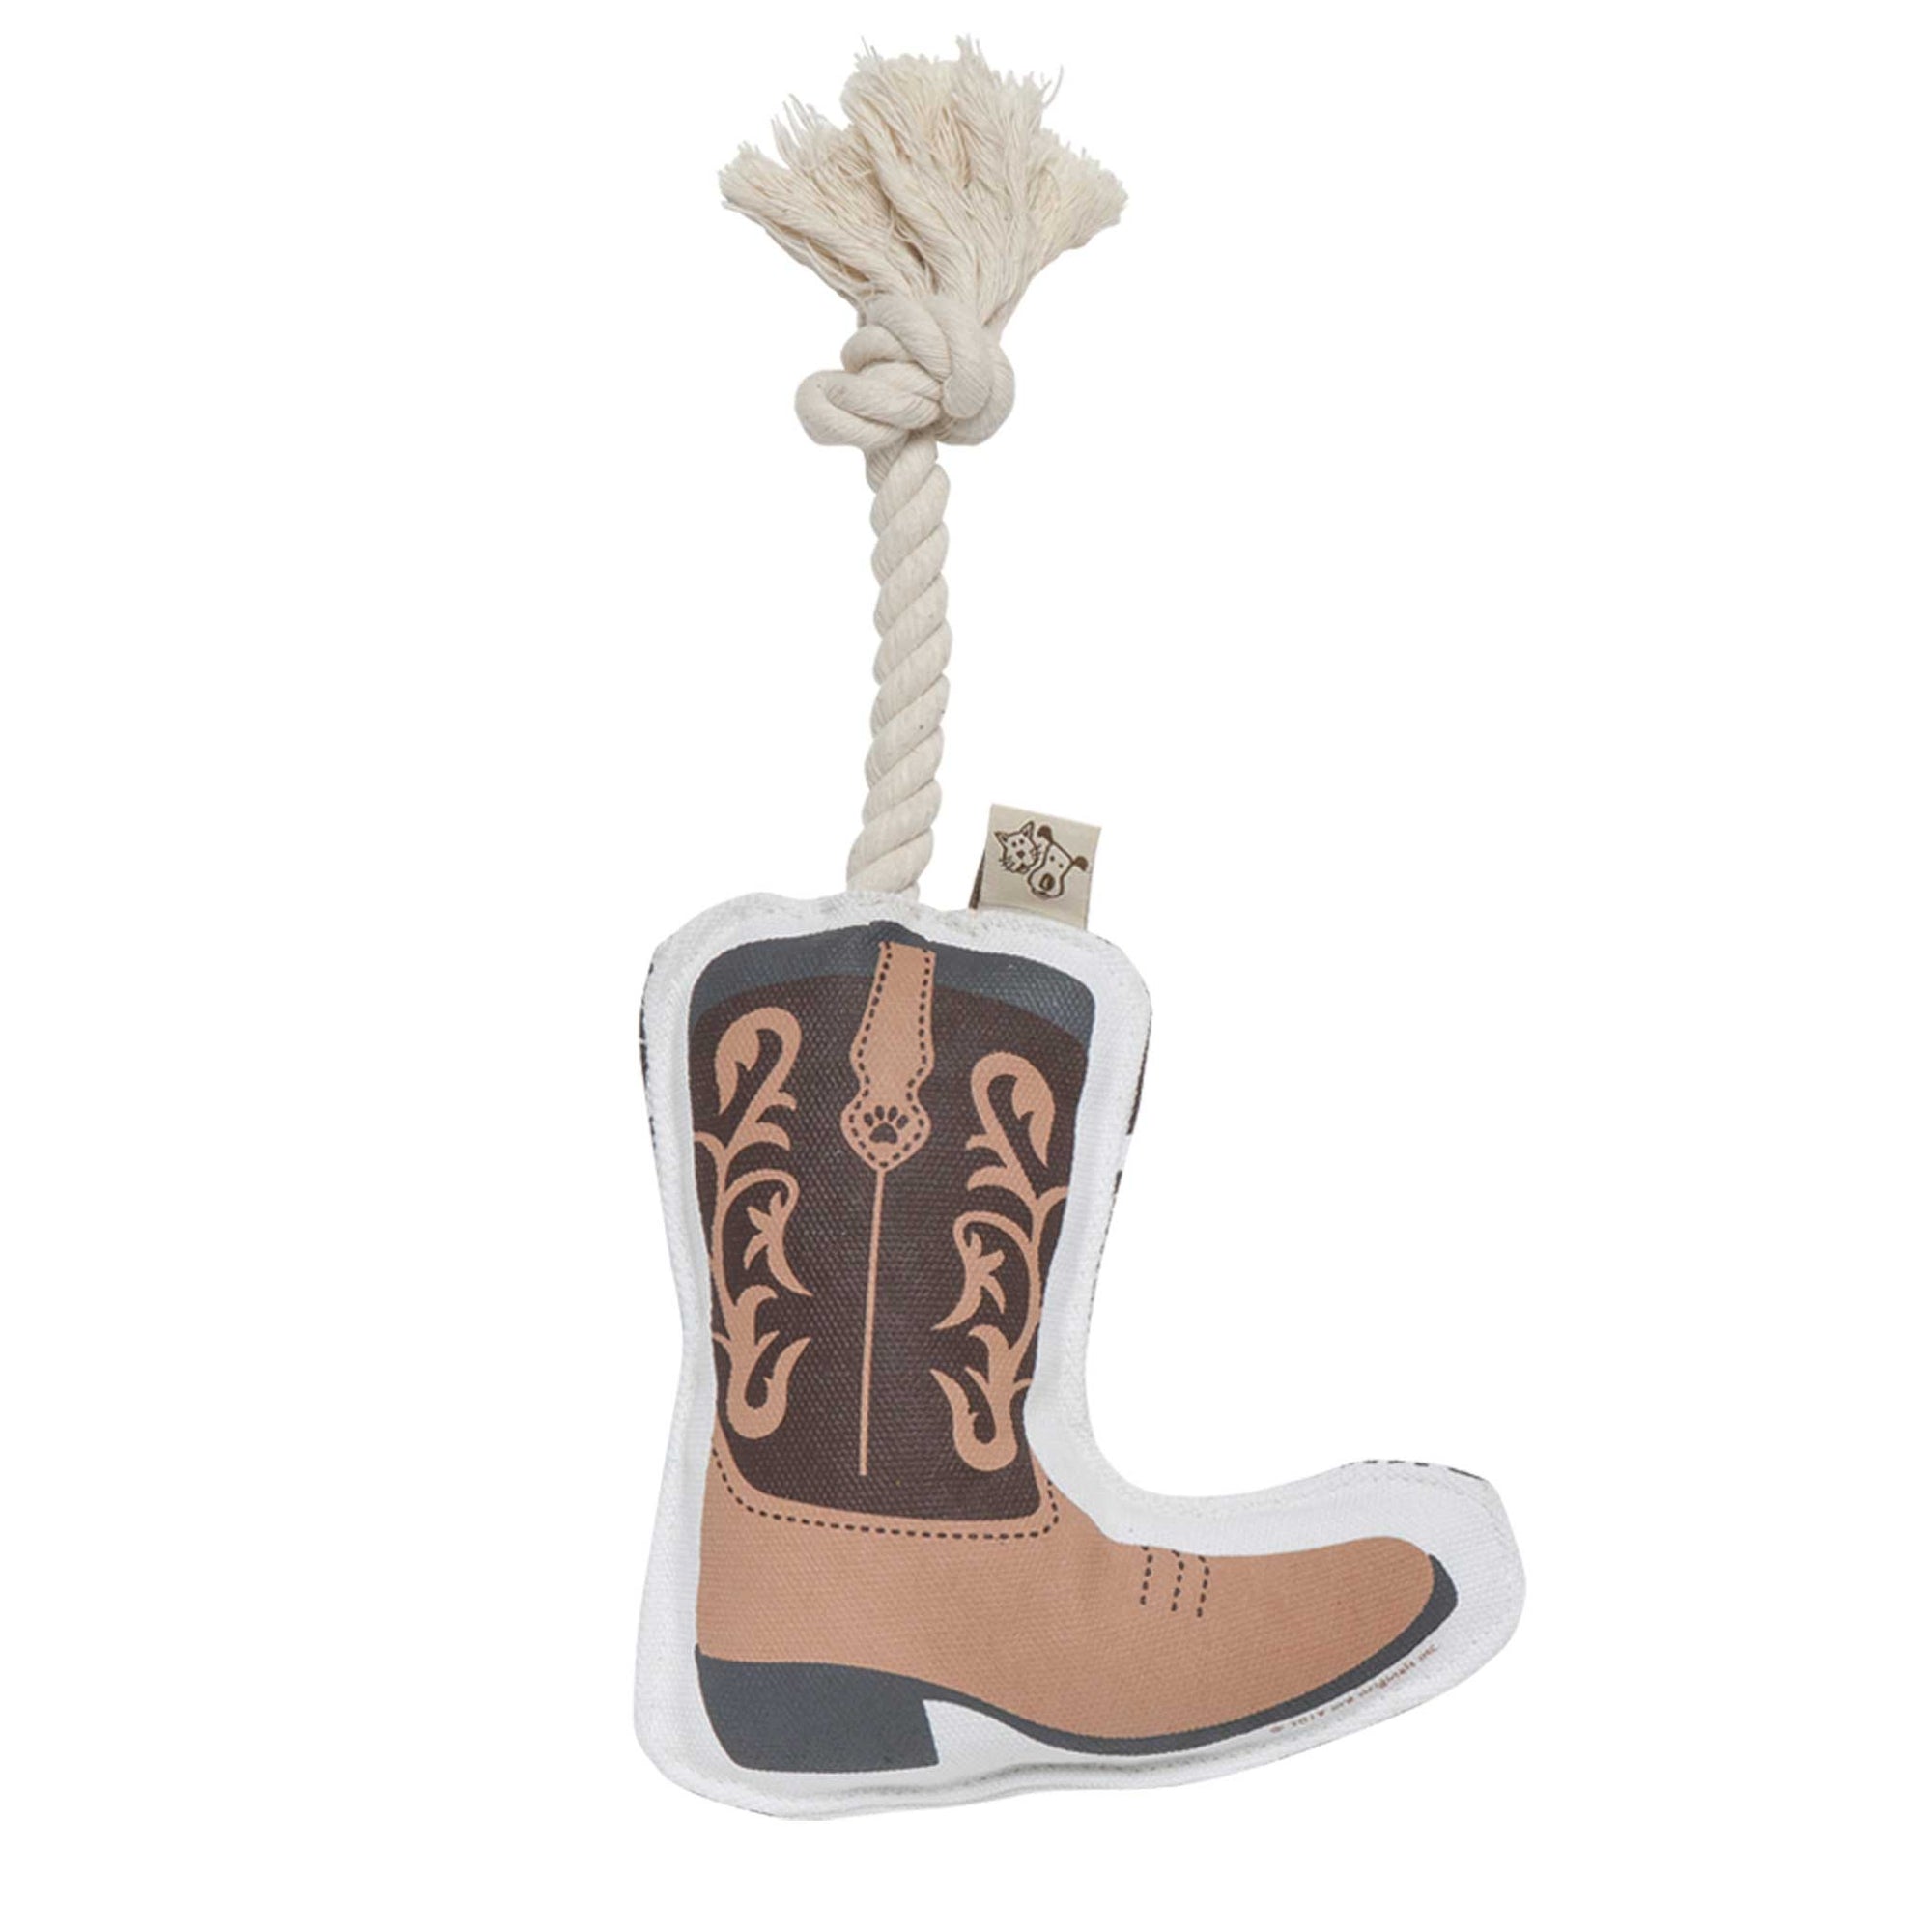 Ore' Pet Cowboy Boot Rope Dog Toy (12.5")